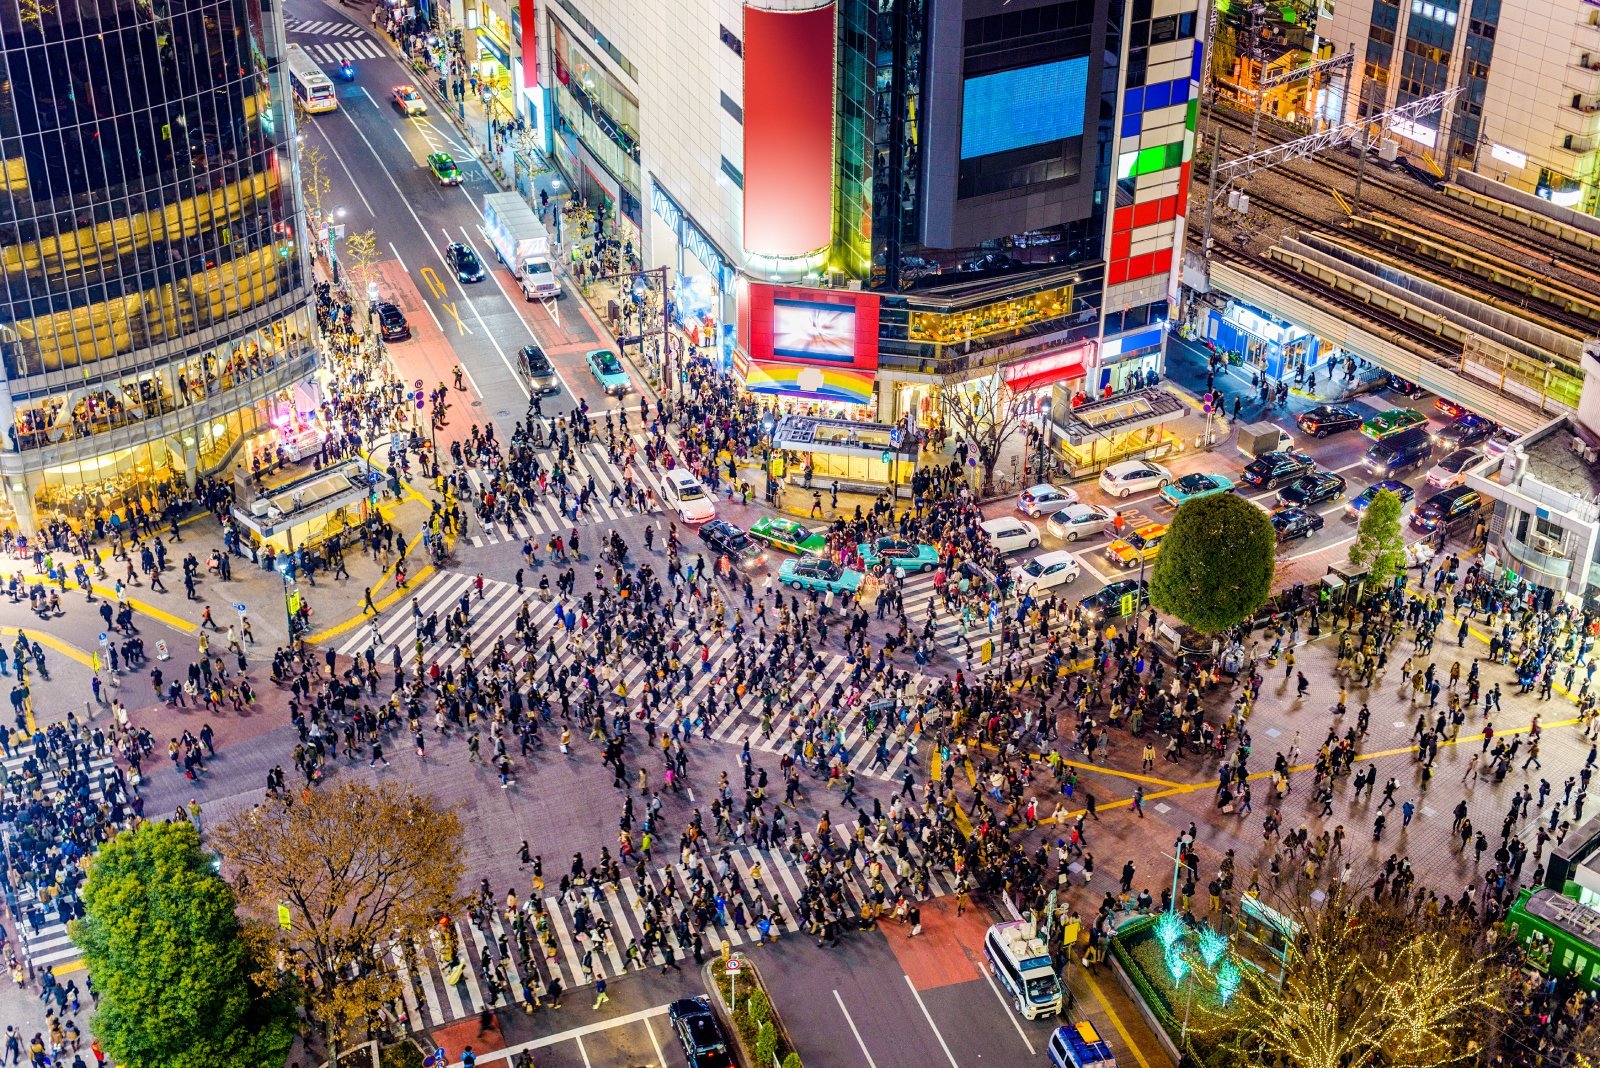 Image Credit: Shutterstock / Sean Pavone <p>Dive into Tokyo’s bustling street life, with mornings spent exploring traditional markets like Tsukiji or browsing the latest gadgets in Akihabara’s electronic shops. Experience the city’s vibrant nightlife, from karaoke bars in Shinjuku to izakayas (Japanese pubs) in Shibuya, and indulge in late-night ramen or sushi at neighborhood eateries.</p>